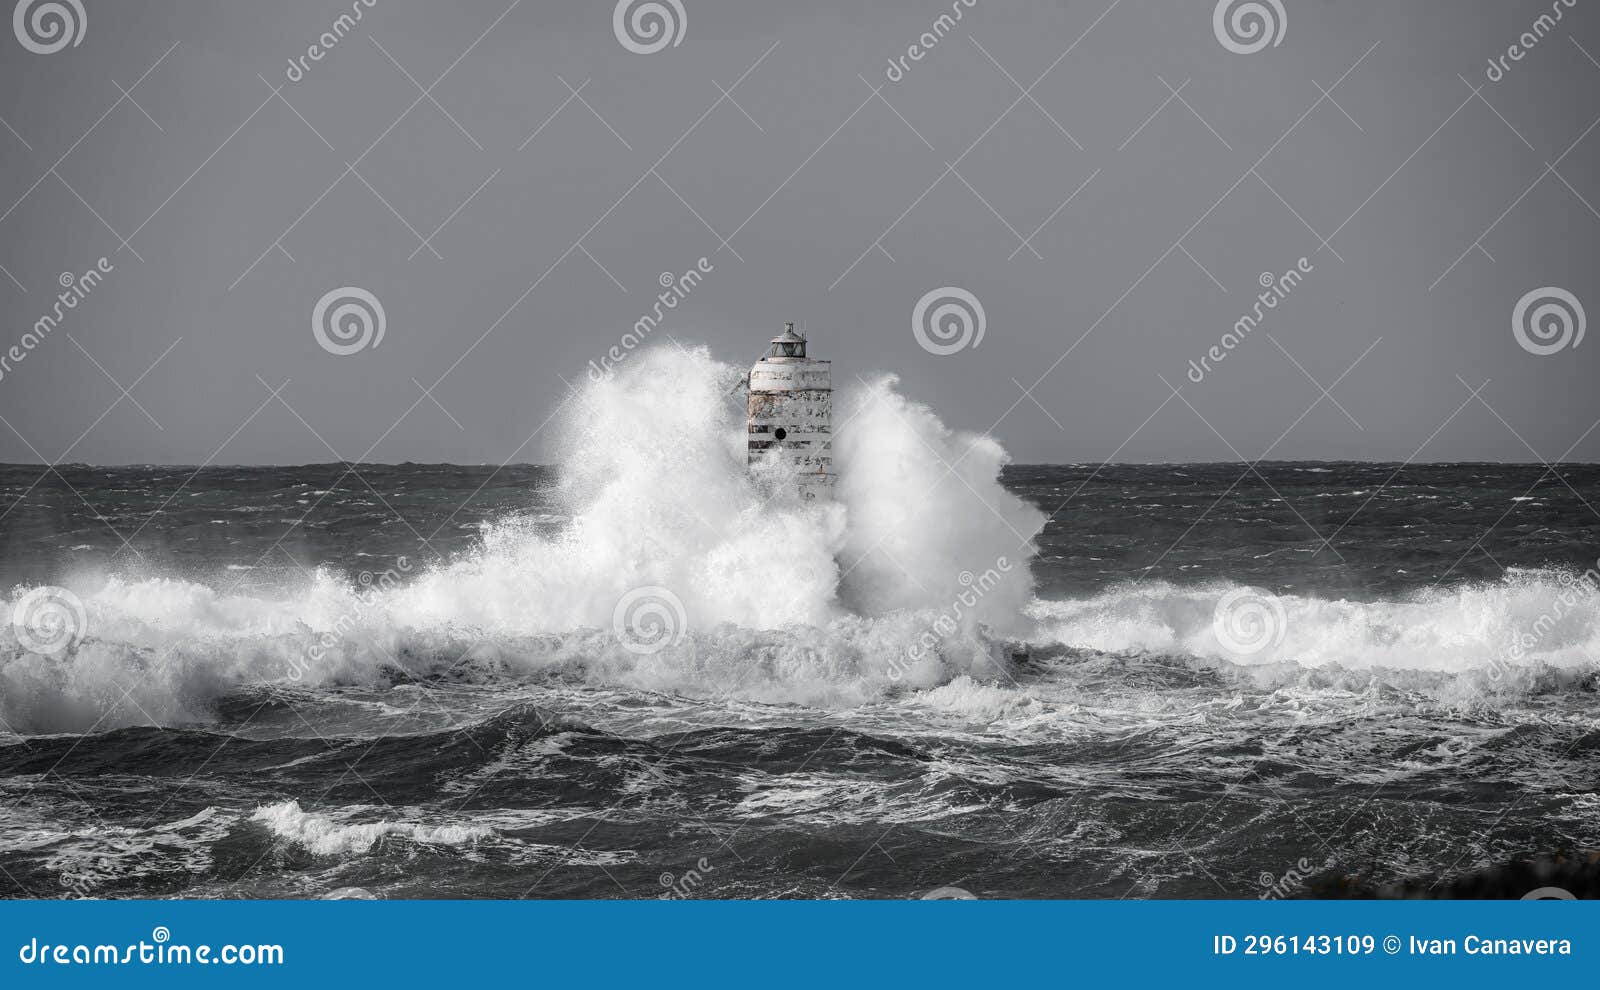 lighthouse storm - mangiabarche lighthouse during a winter swell